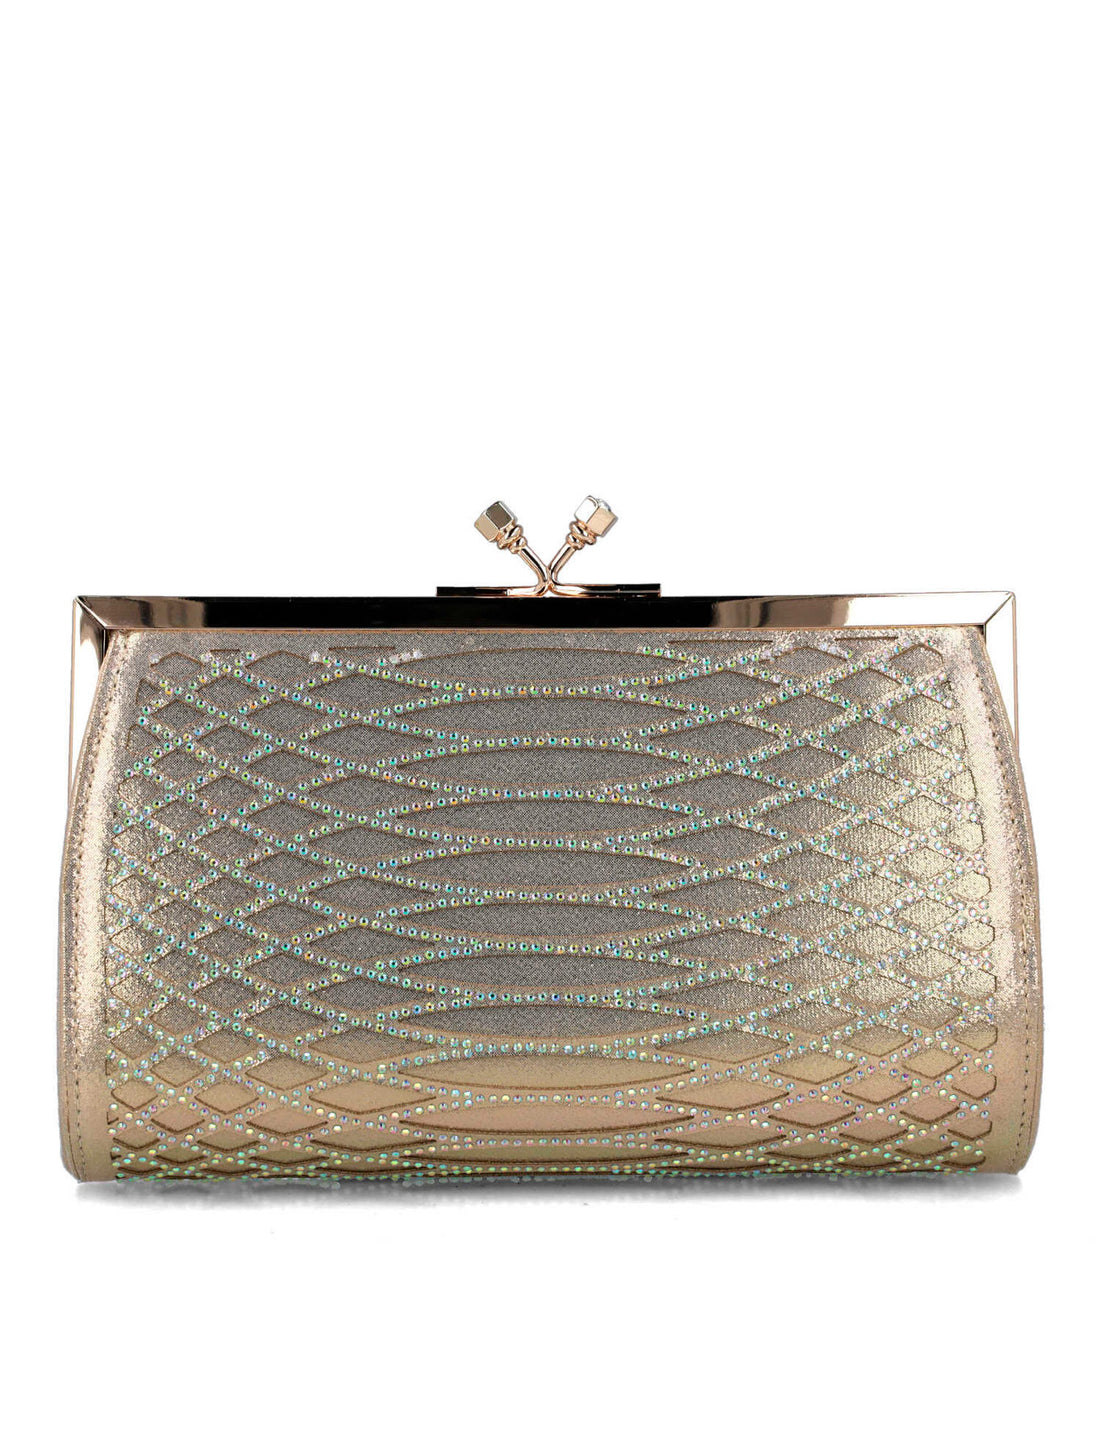 Gold Clutch In Imitation Snake Leather_85597_00_01